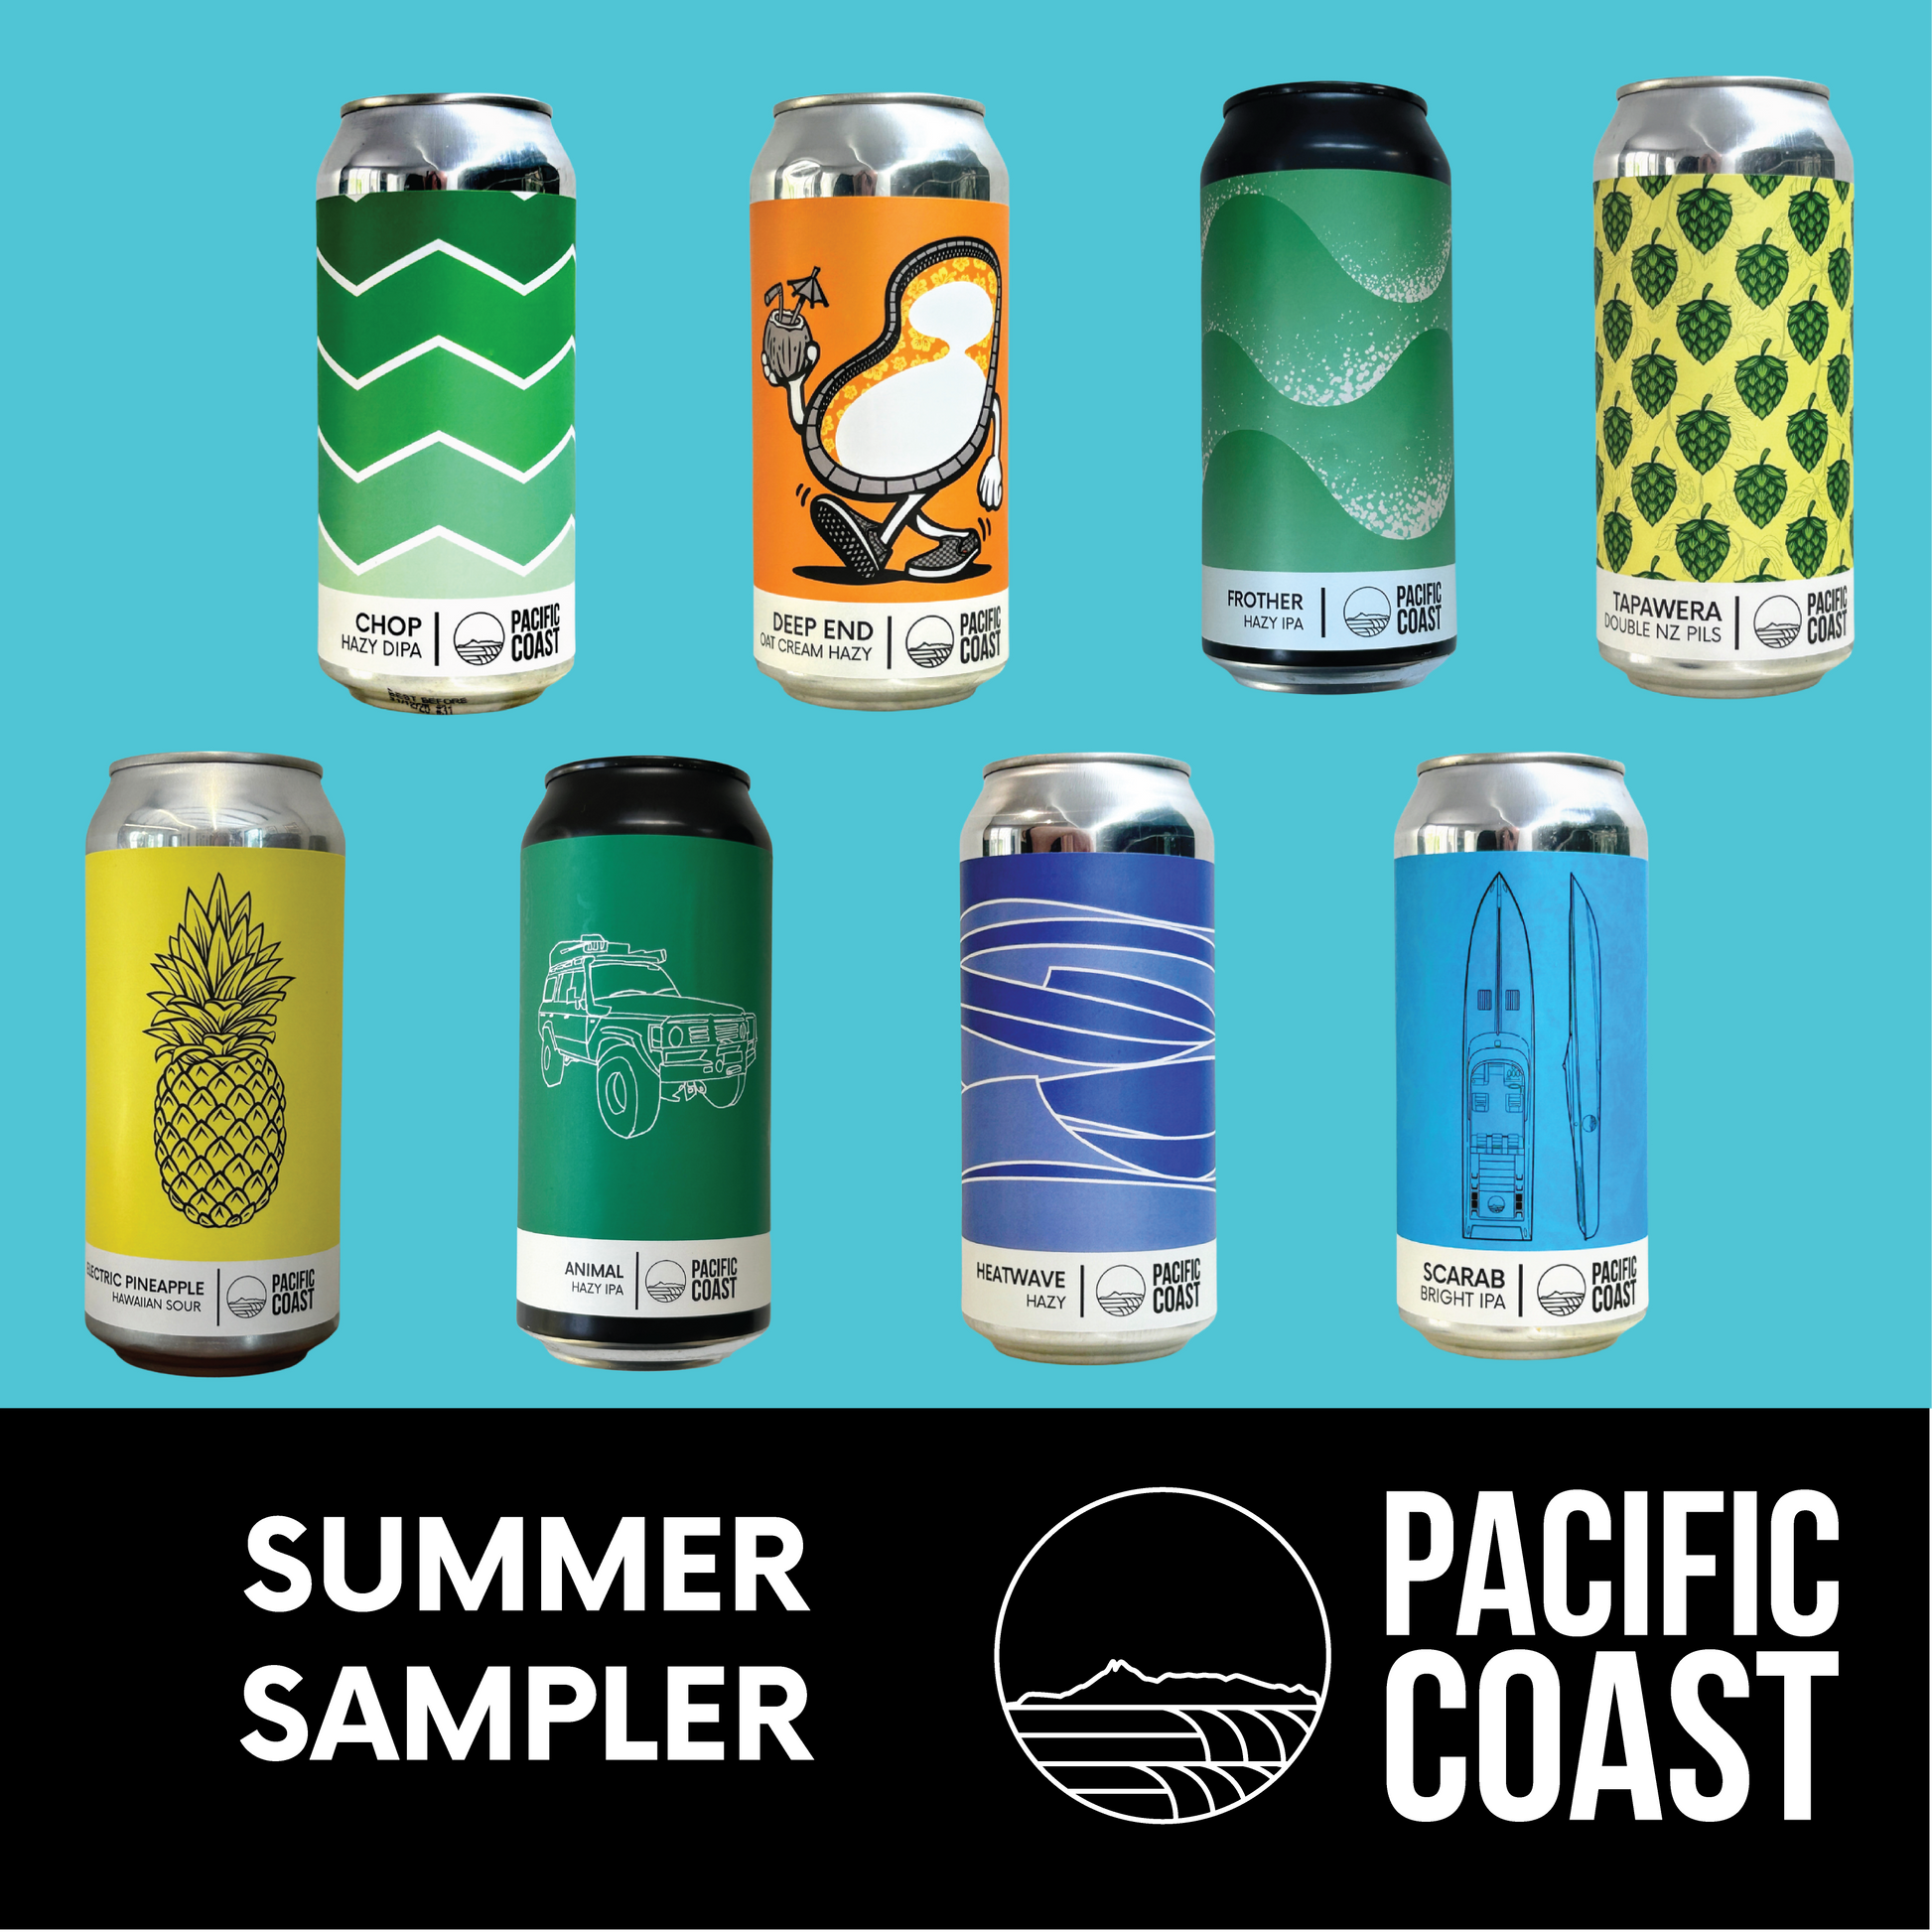 A Case of summery Beer from Pacific Coast Brewery